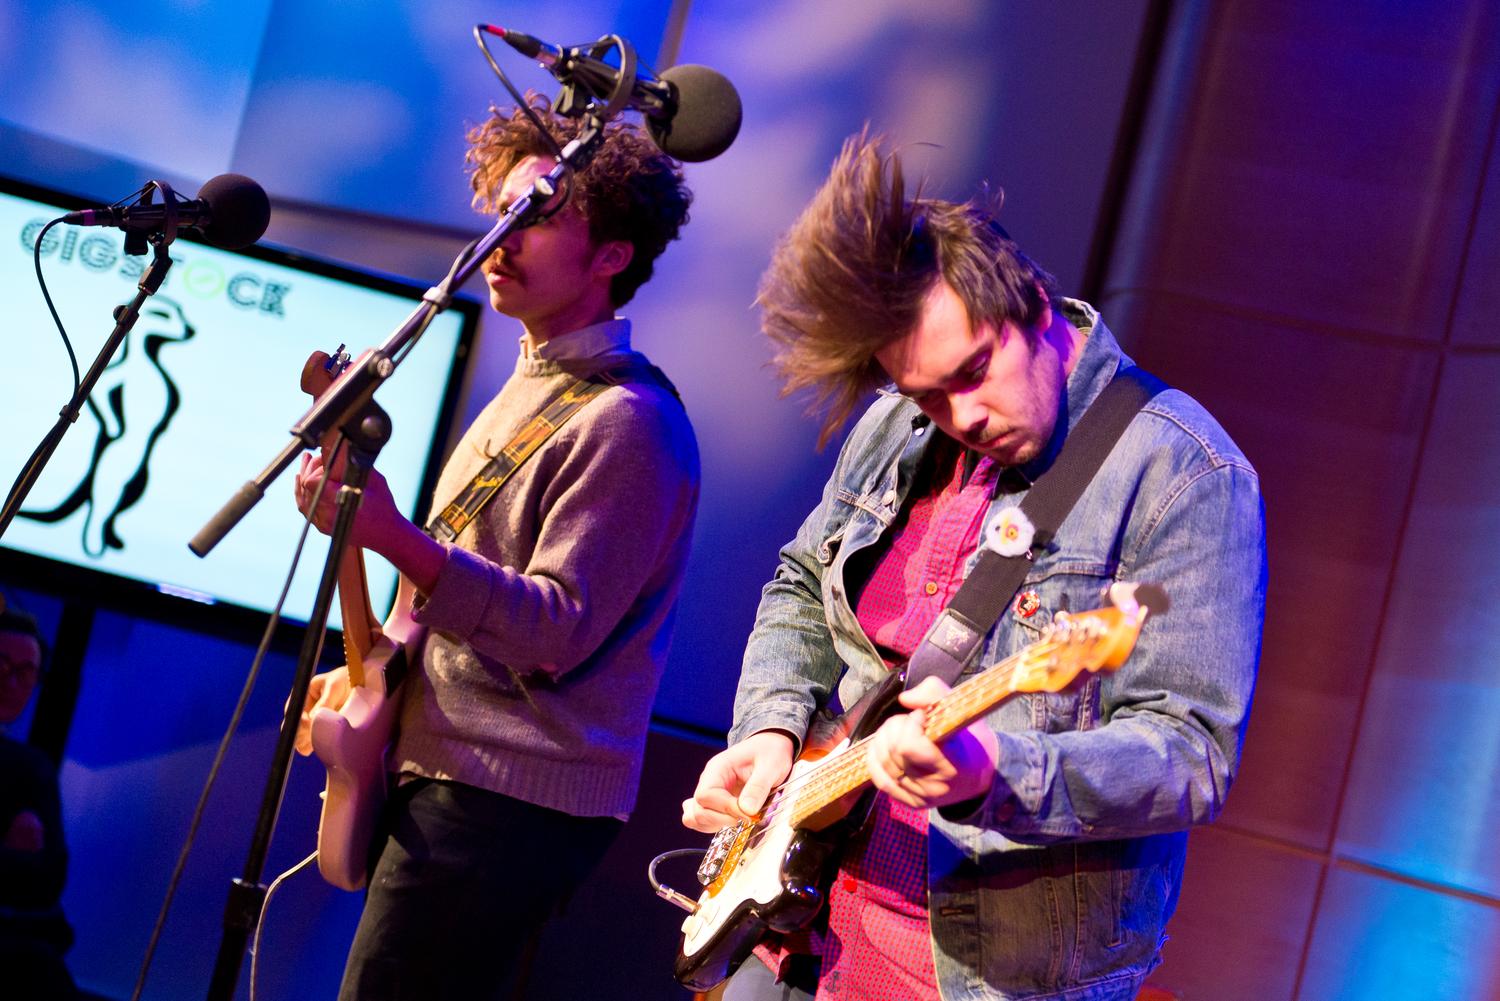 Soundcheck’s Gigstock with The Pains of Being Pure at Heart, Parquet Courts